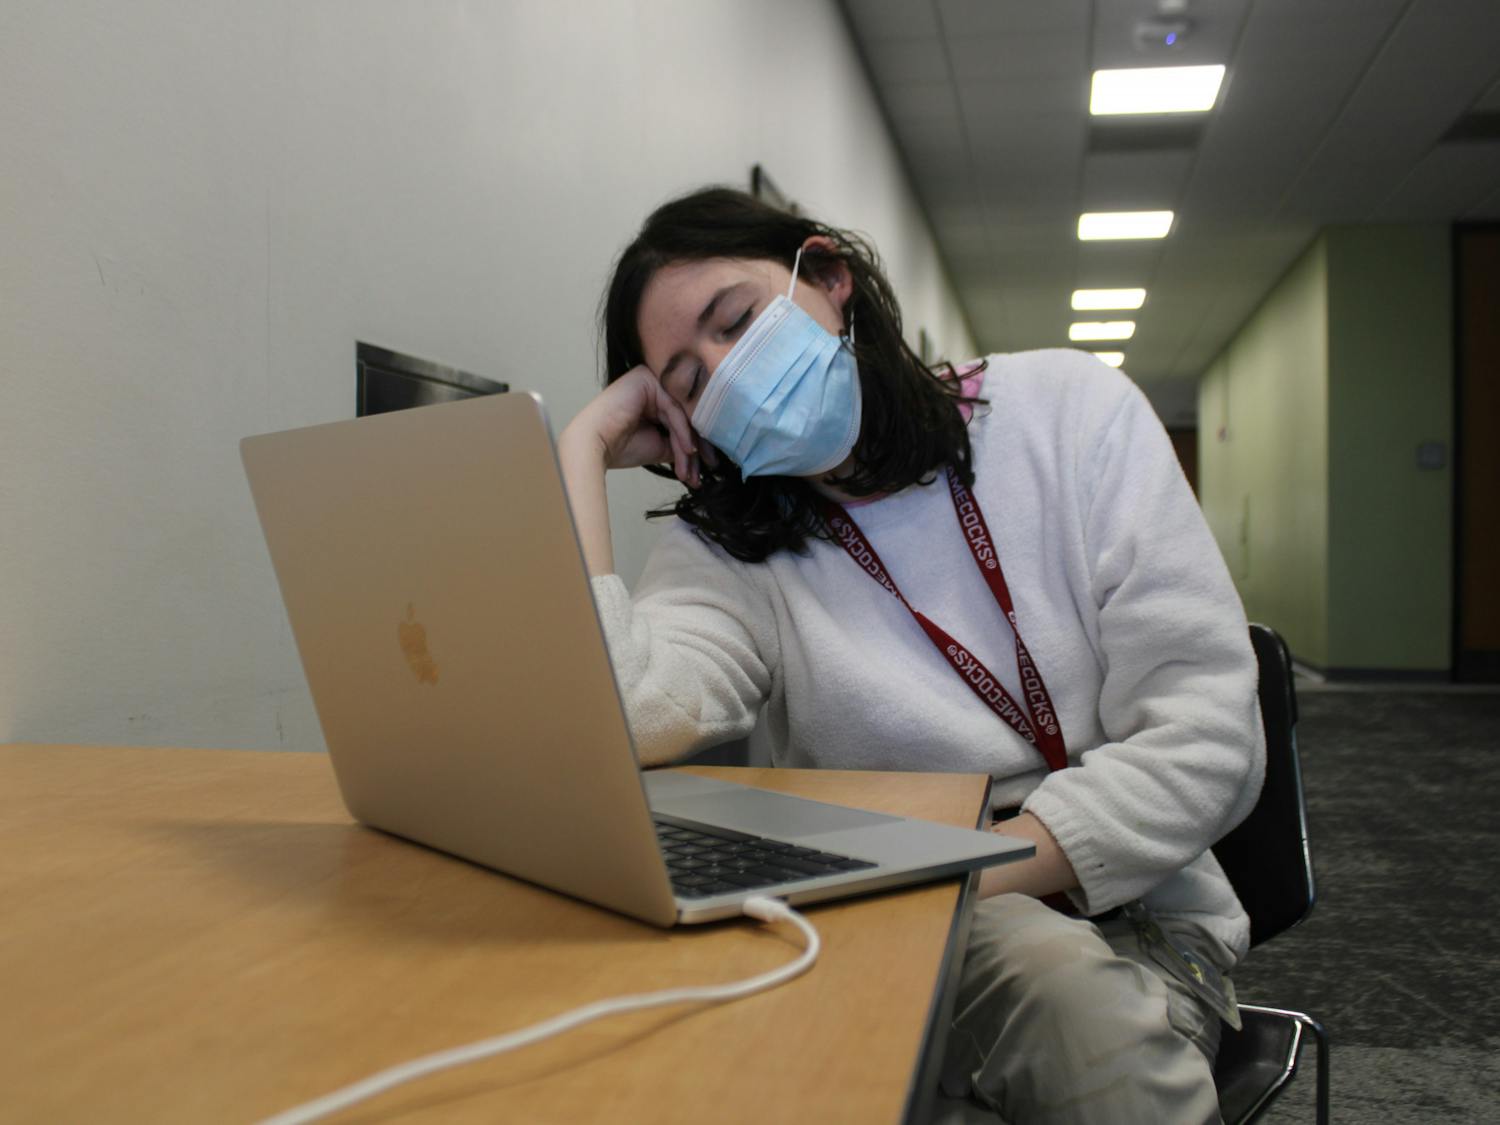 A photo illustration of second-year undecided student Bridget Blackwell fighting to stay awake while working on an assignment in Russell House on Feb. 6, 2023. After two years of online learning, students can struggle with transitioning back to in-person lectures, retaining good study habits and focusing for extended periods of time.